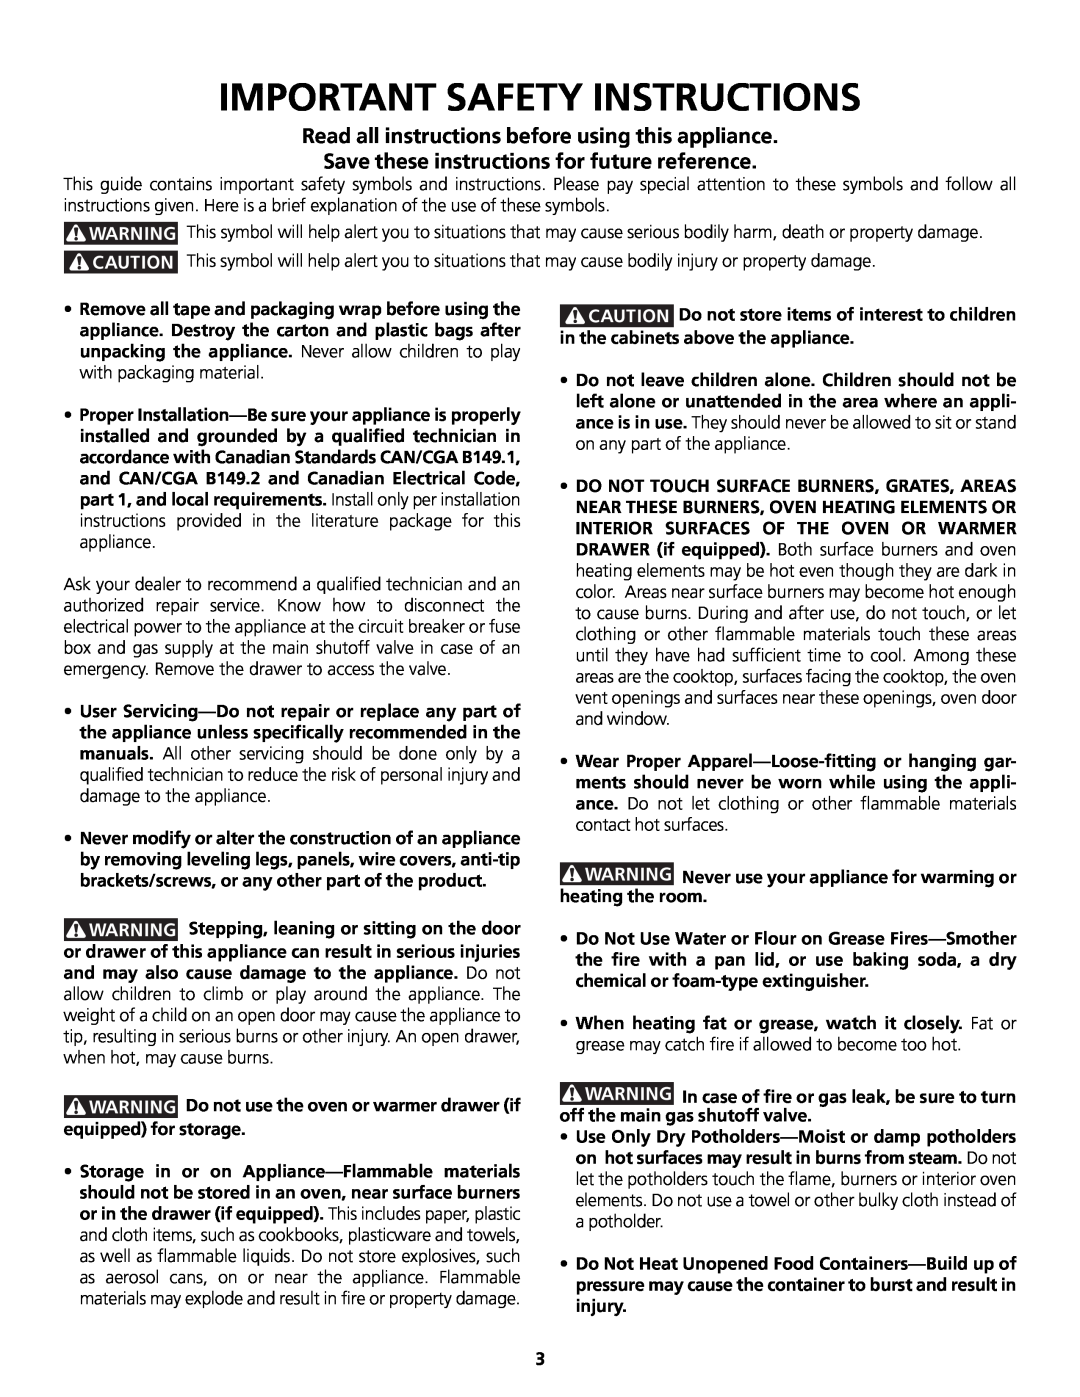 Frigidaire 318200858 Important Safety Instructions, Read all instructions before using this appliance 